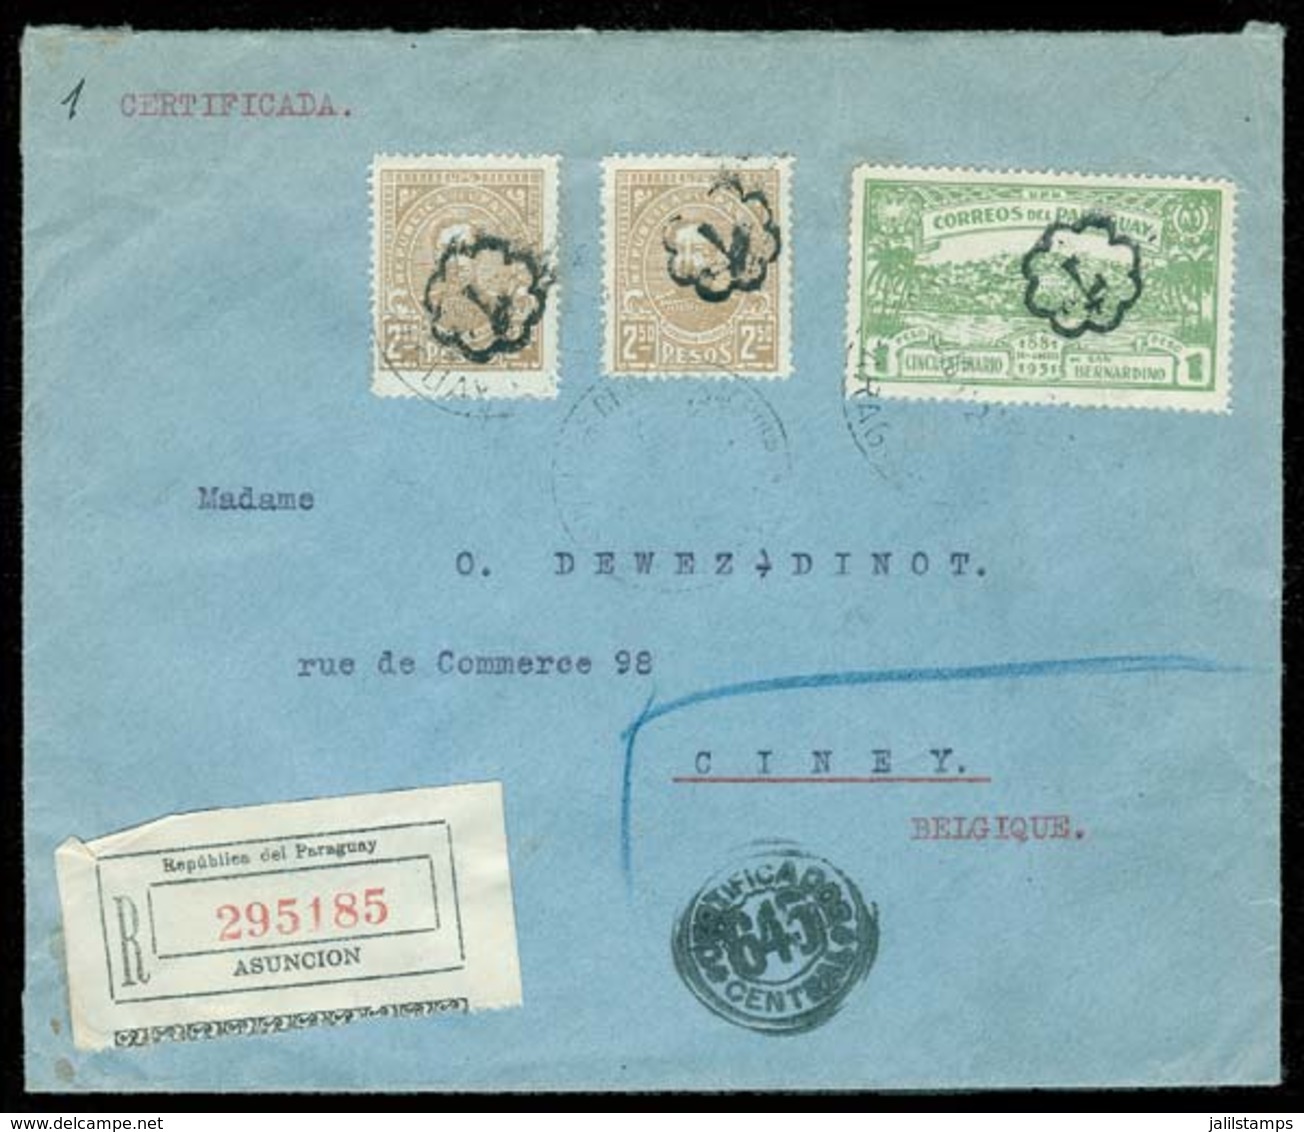 PARAGUAY: Registered Cover Sent From Asunción To Belgium On 10/DE/1931, Franked With 5P. And Cancelled By "7" Inside Ros - Paraguay